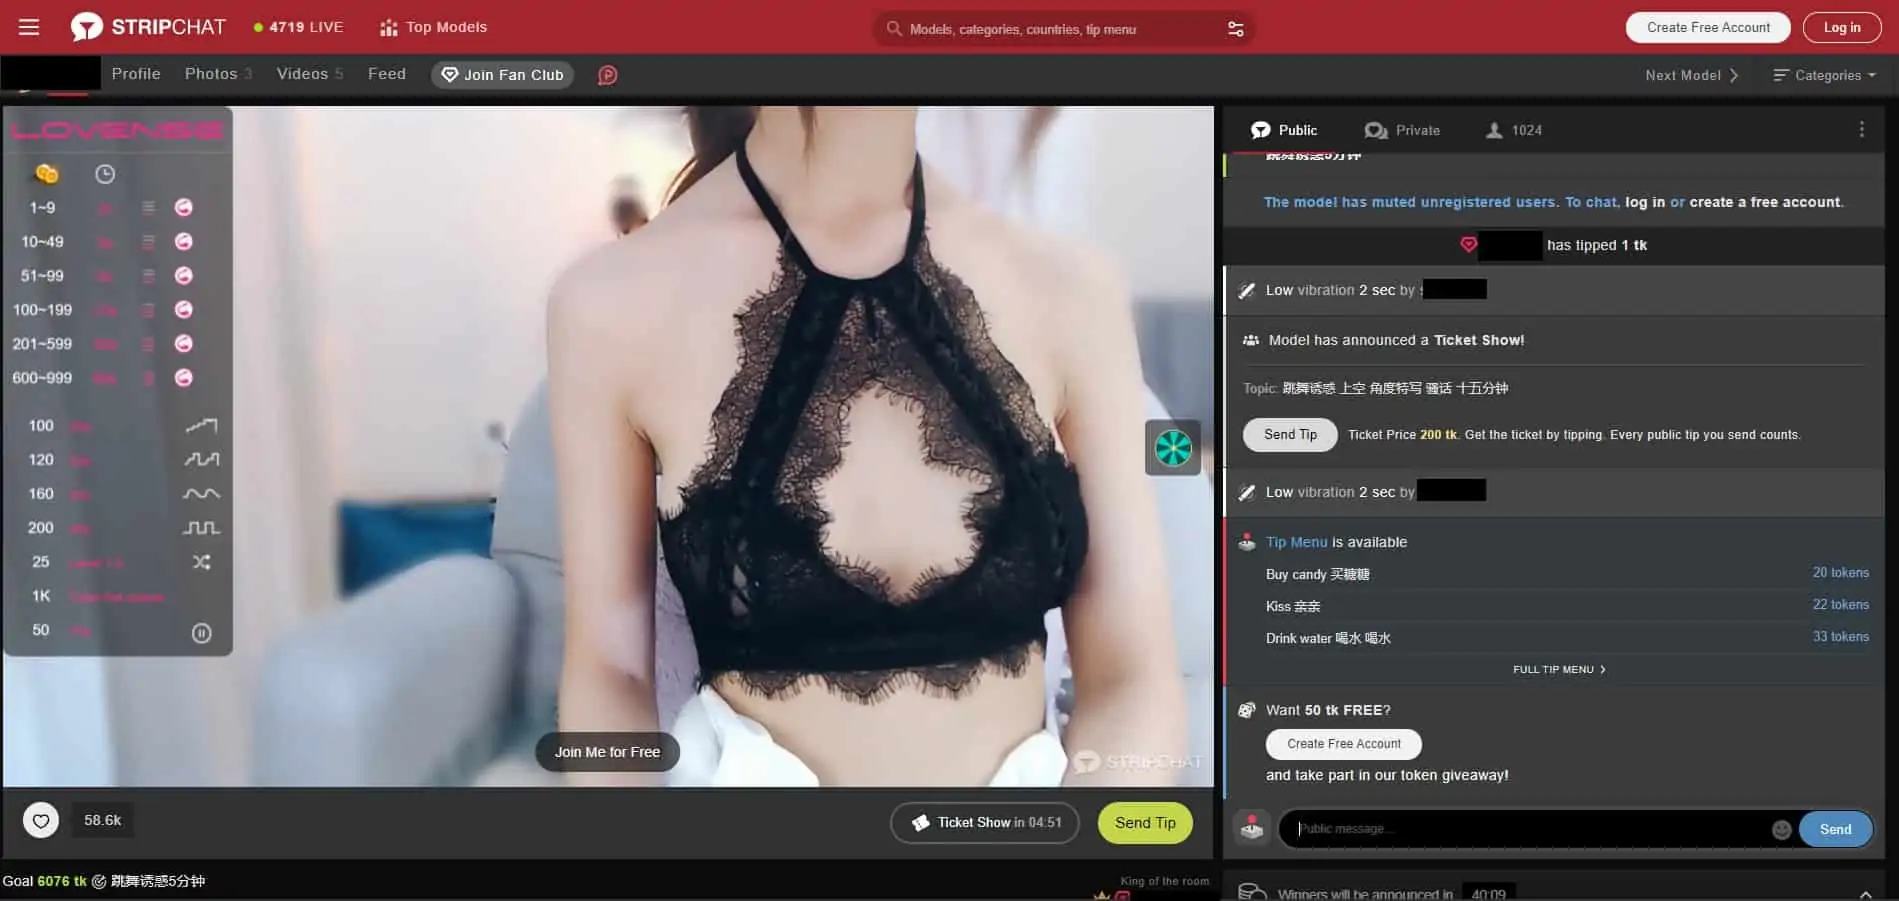 Sex cam site Stripchat exposes user, model info on the web report foto foto